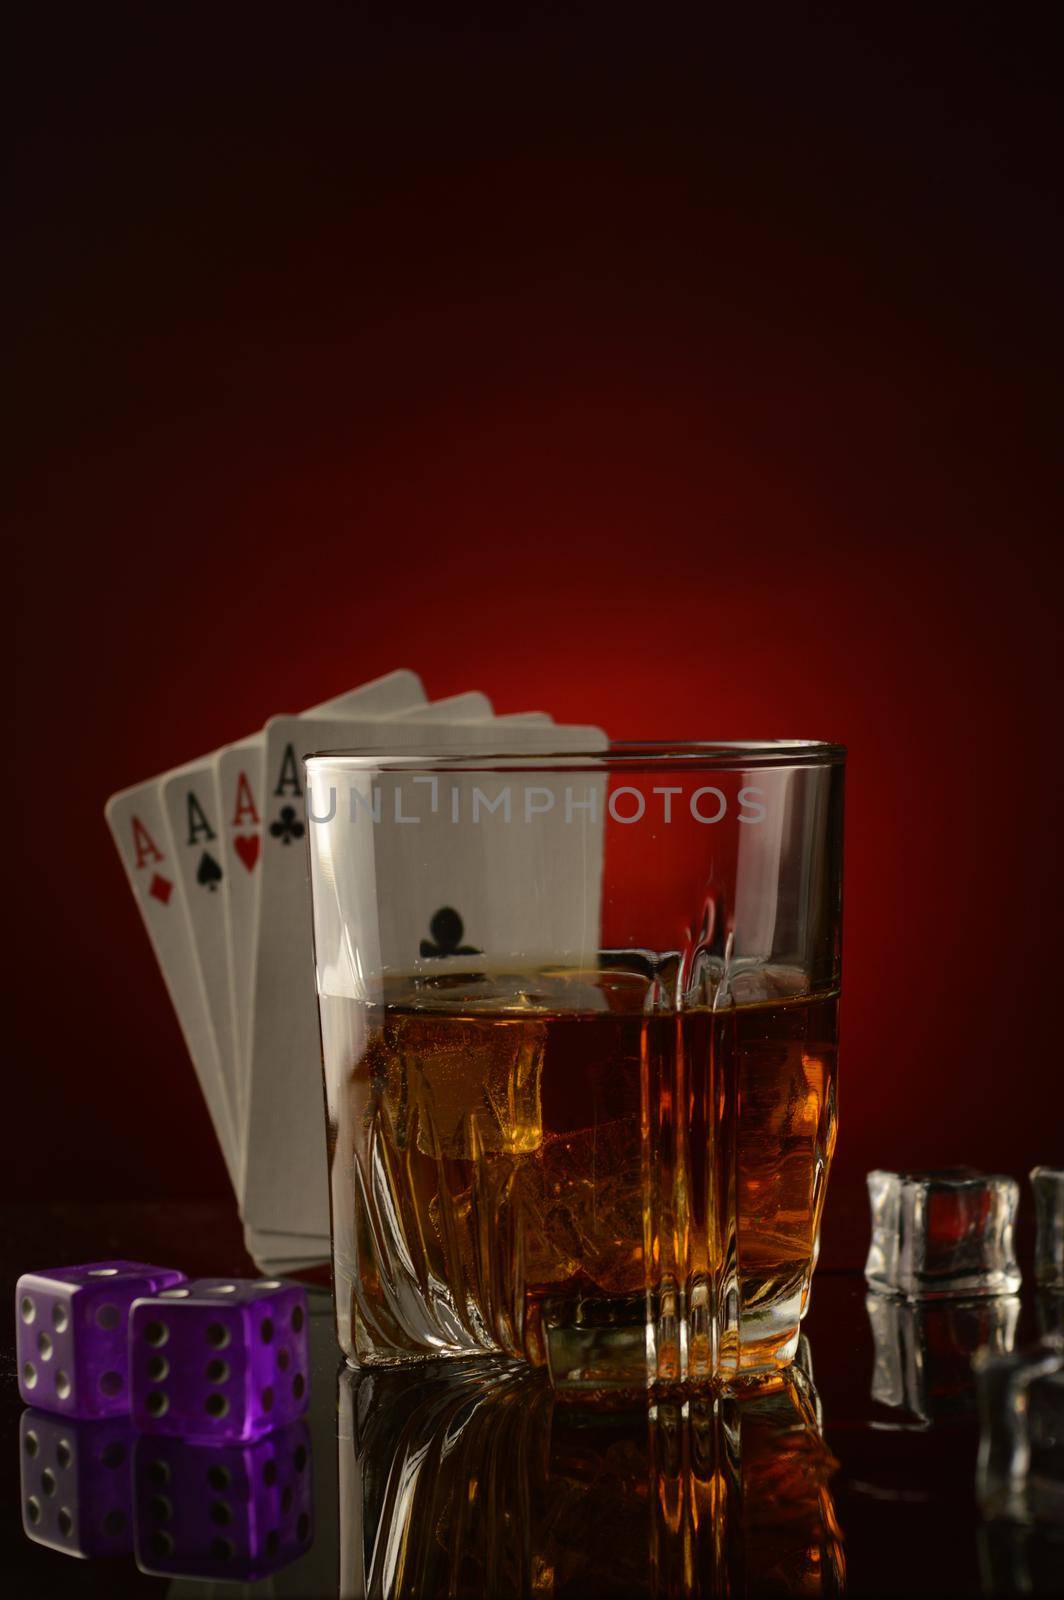 A conceptual image of a gambling mans drink focused on a glass of whiskey with four aces and pair of casino dice over a dark atmospheric background.